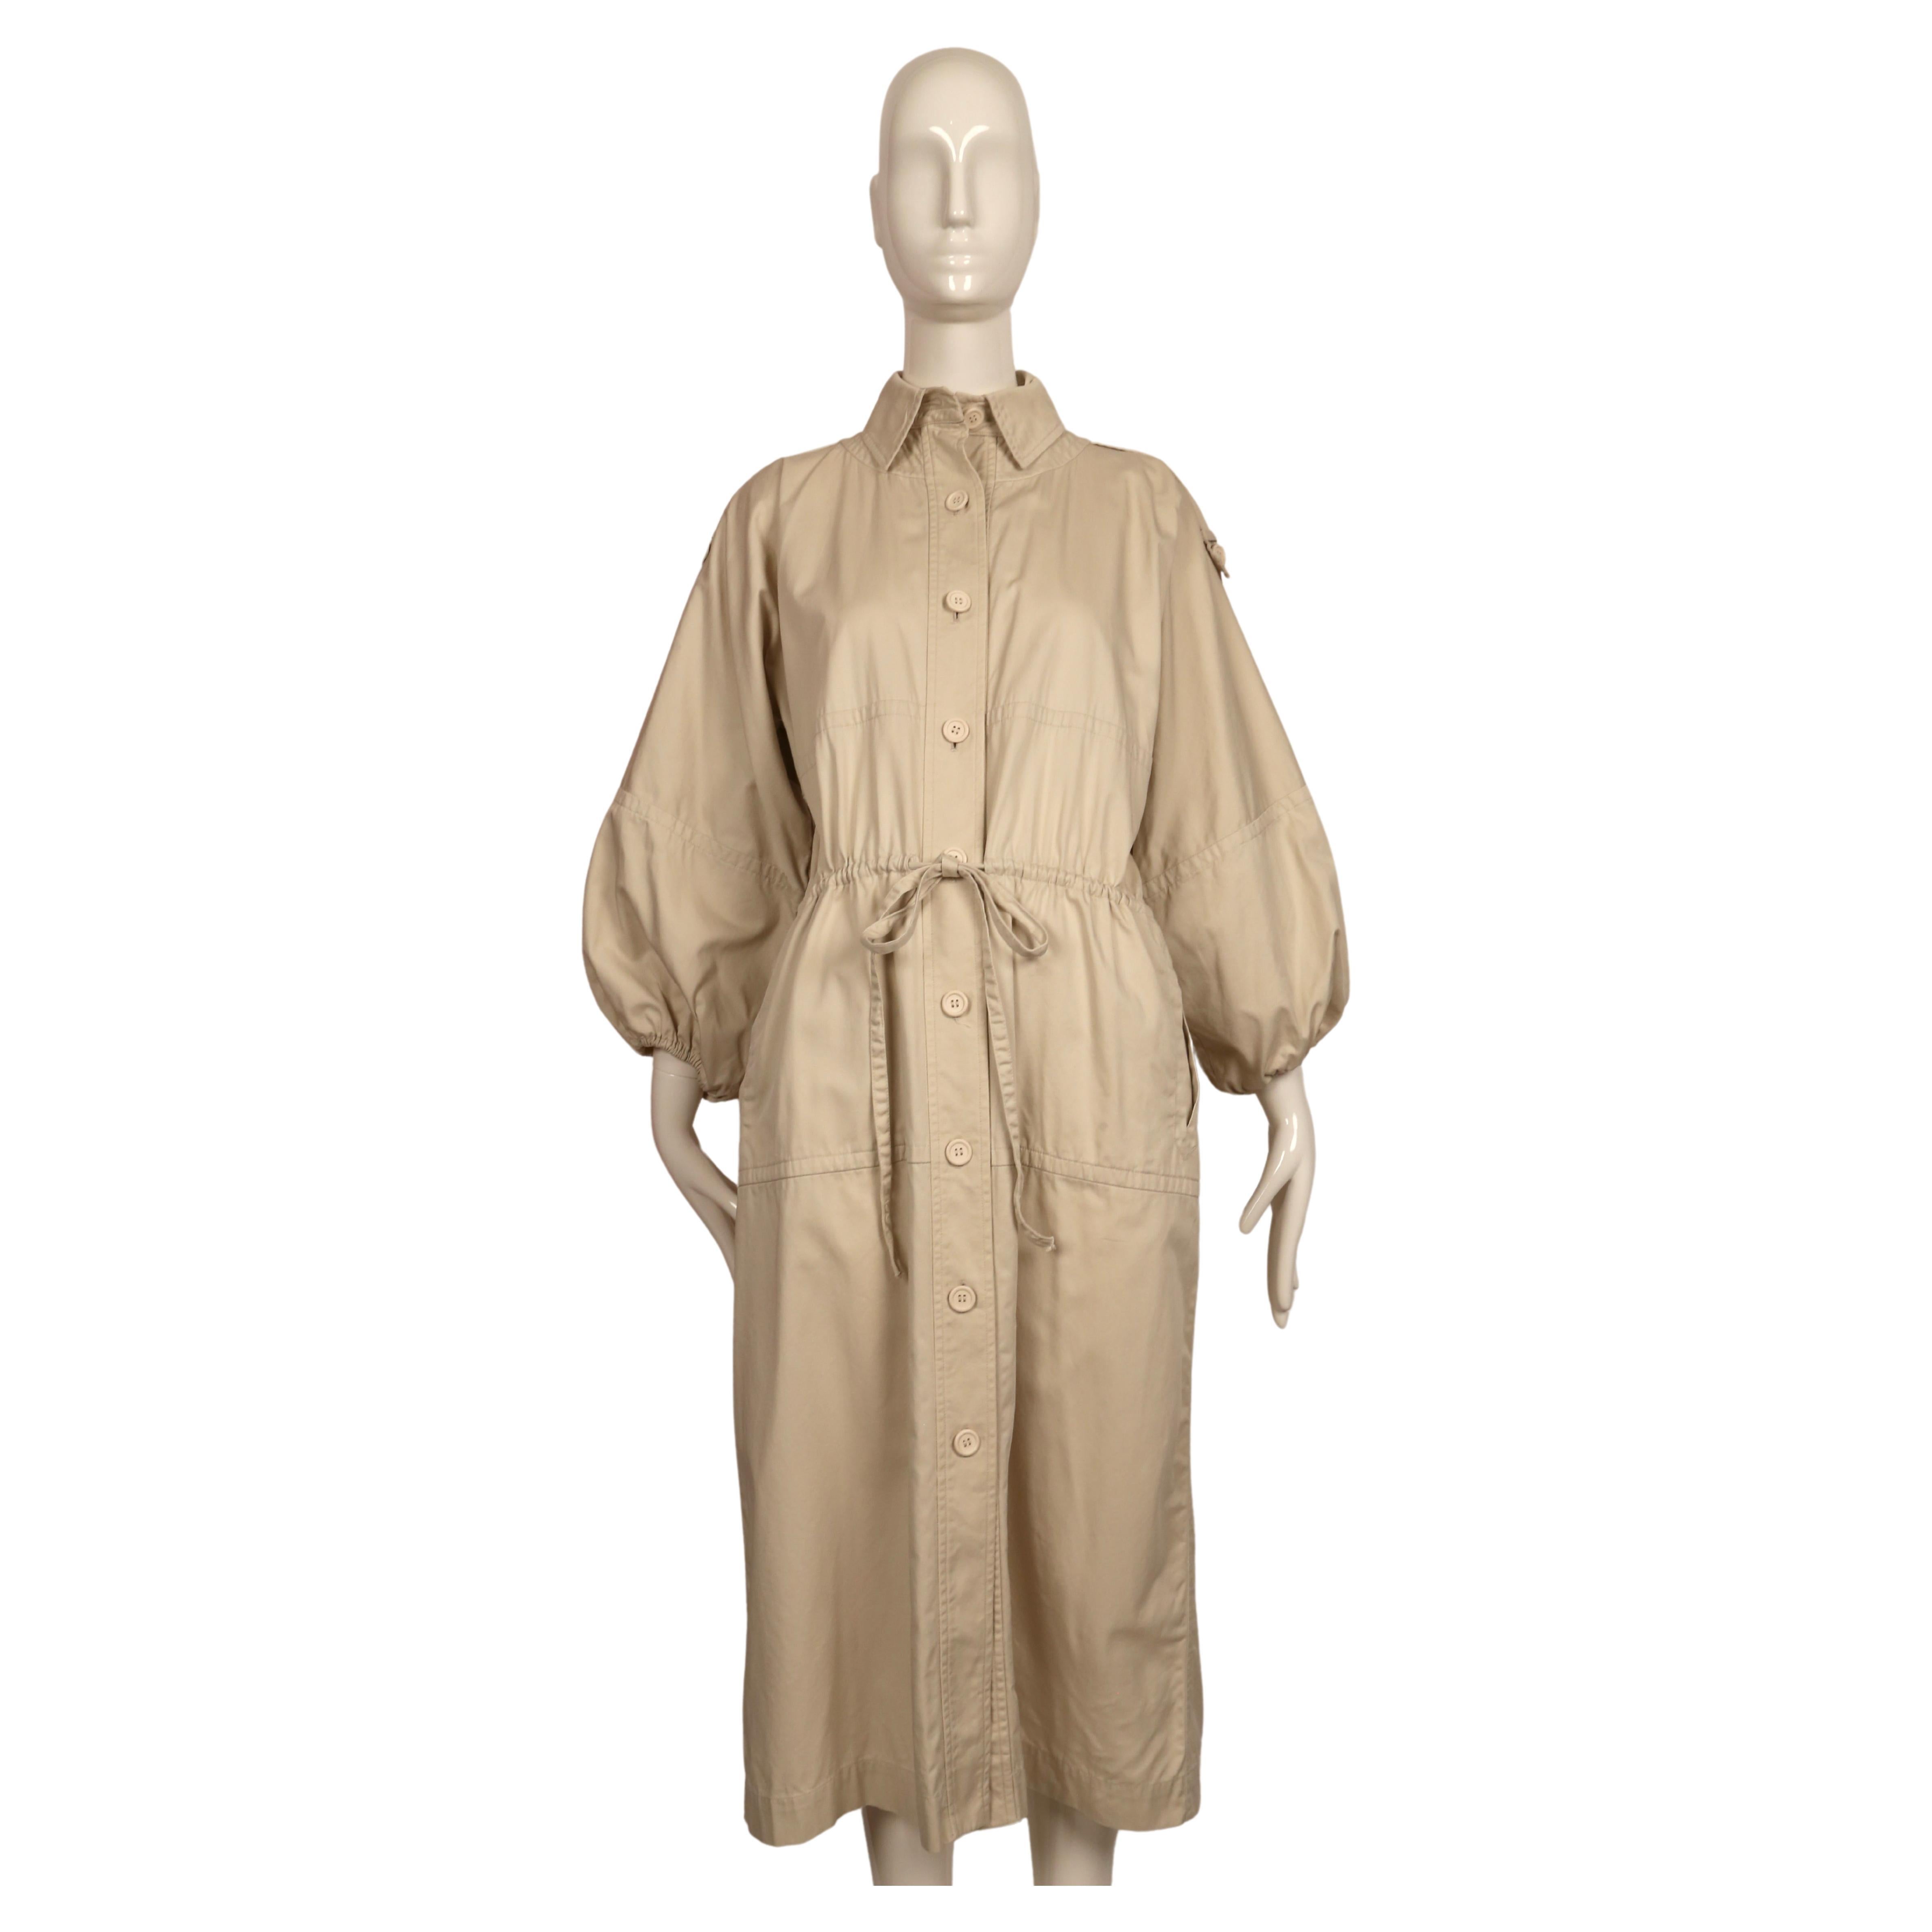 Very rare light tan cotton twill trench coat designed by Yves Saint Laurent as seen on the spring 1978 runway in several colors. This coat is labeled French 36 however this fits many sizes due to the loose cut. Sleeves have a slightly cropped fit.